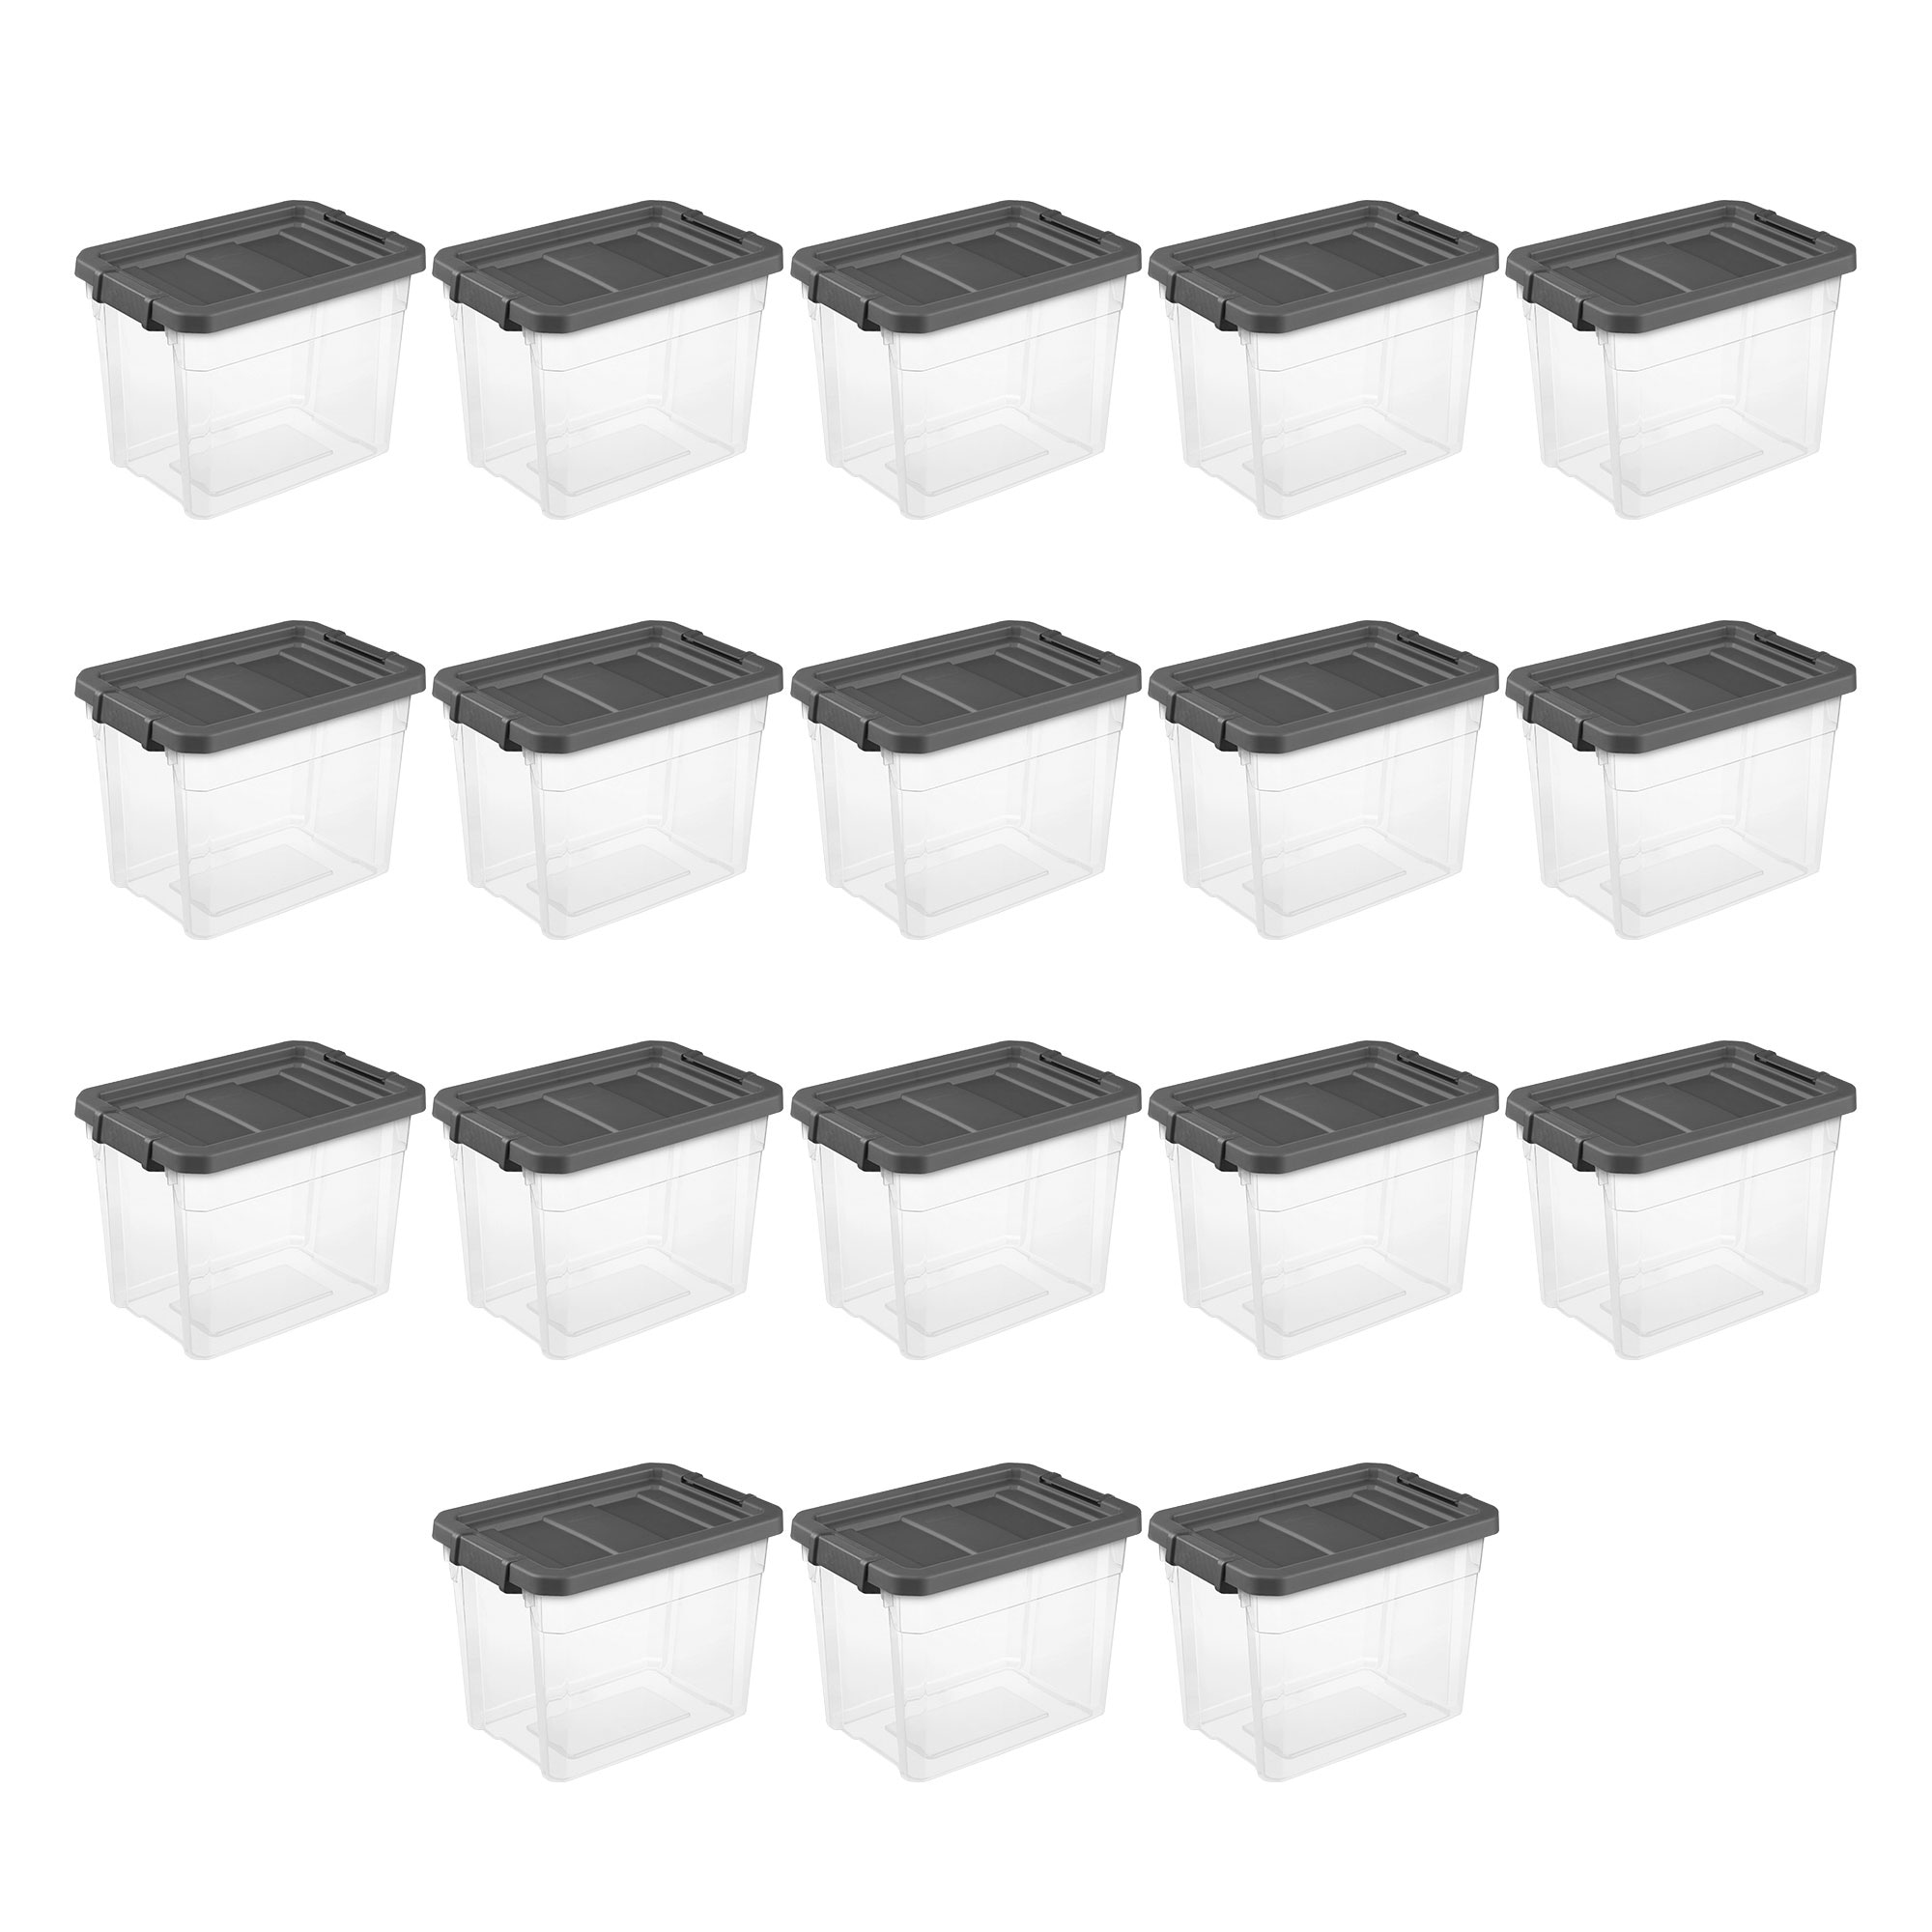 Sterilite Ultra 2 Drawer Filing Storage Cart, Plastic Rolling Cart with  Wheels to Organize Desk, Office, White with Textured Clear Drawers, 6-Pack